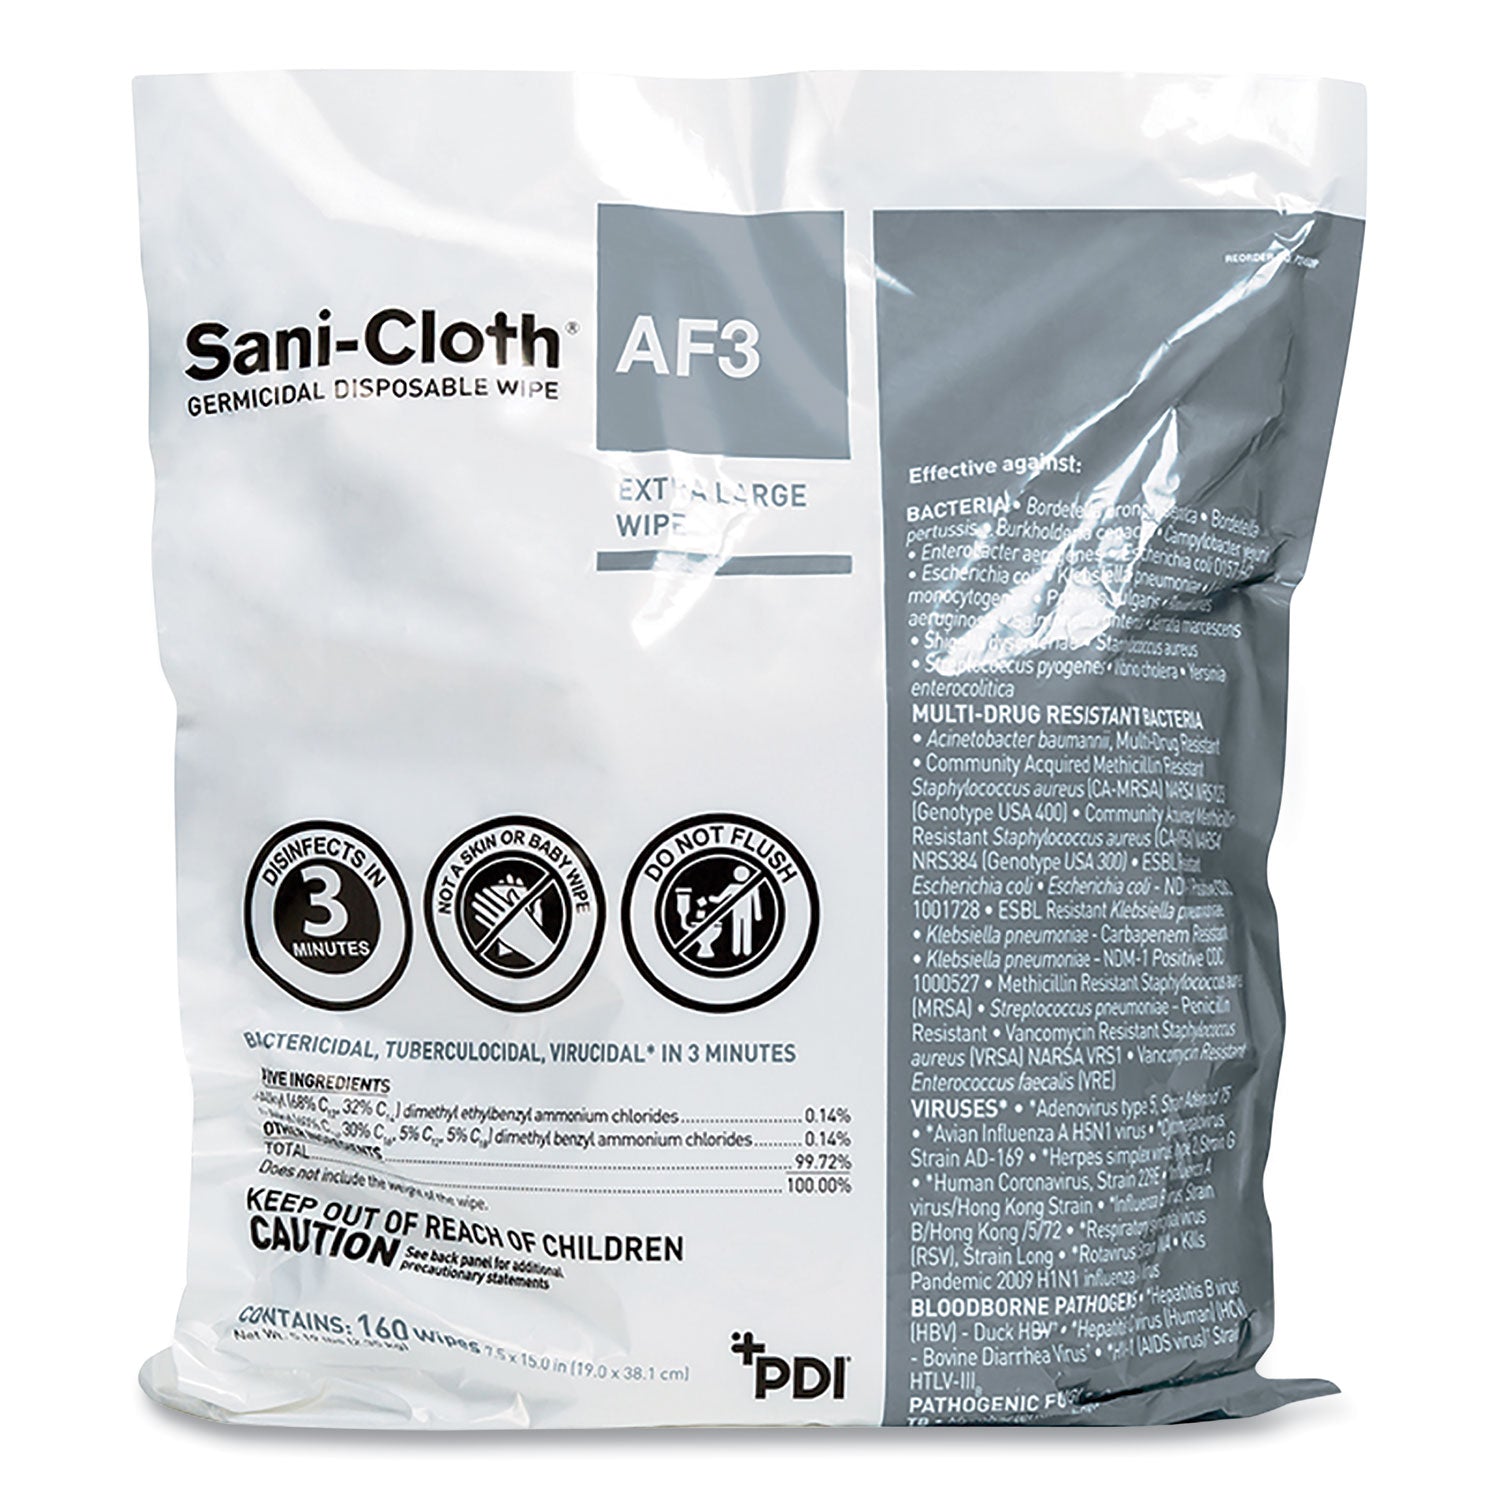 sani-cloth-af3-germicidal-disposable-wipe-refill-extra-large-1-ply-75-x-15-unscented-white-160-wipes-bag2-bags-carton_pdip2450p - 1